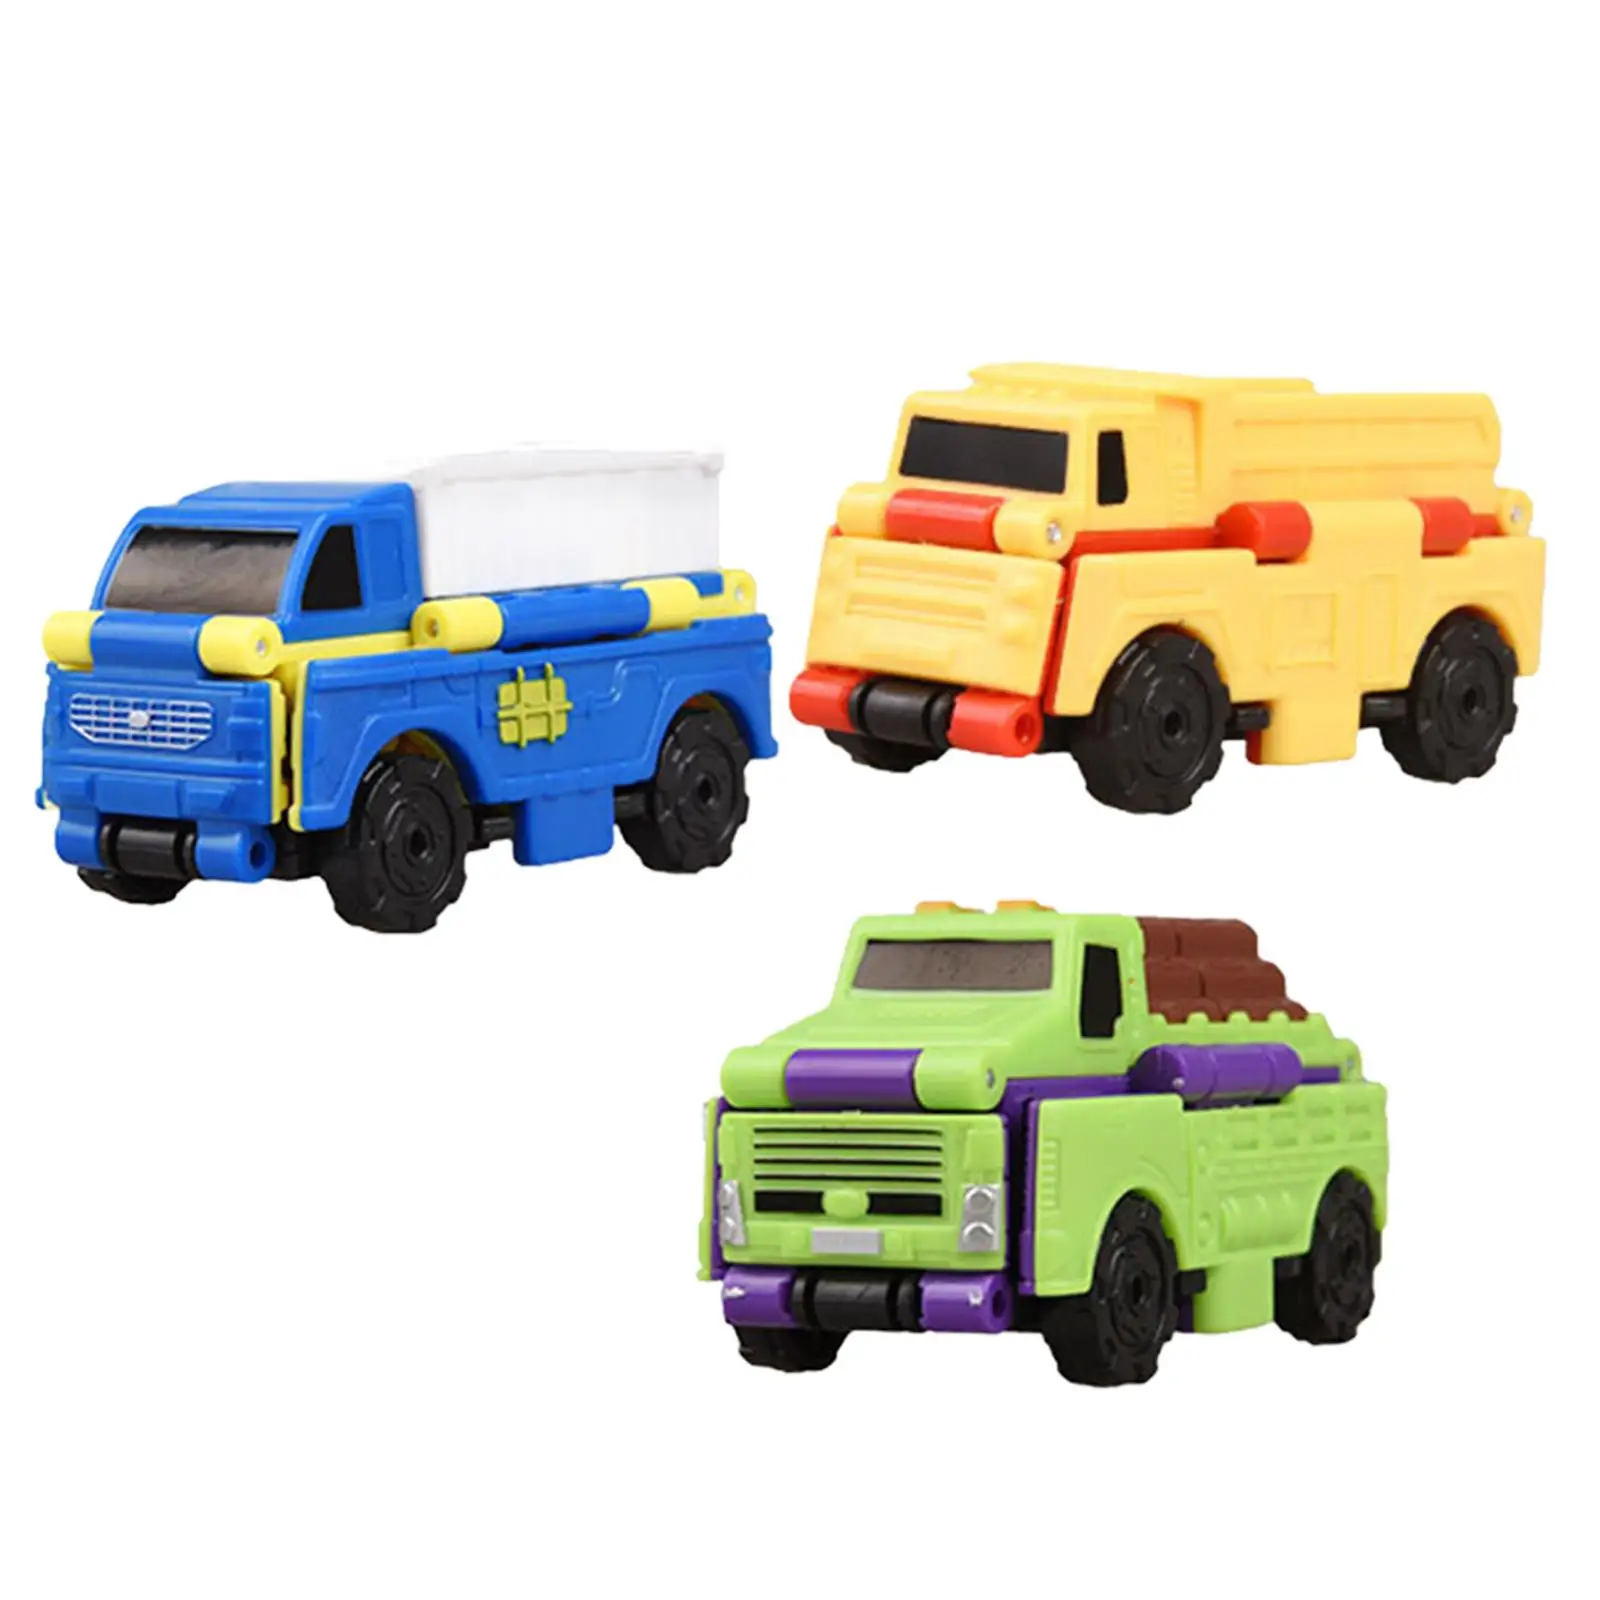 

3x Transformable Cars Sensory Toy Deformation Car Dual Design Toy Cars for Festival Reward Education Props Prize Birthday